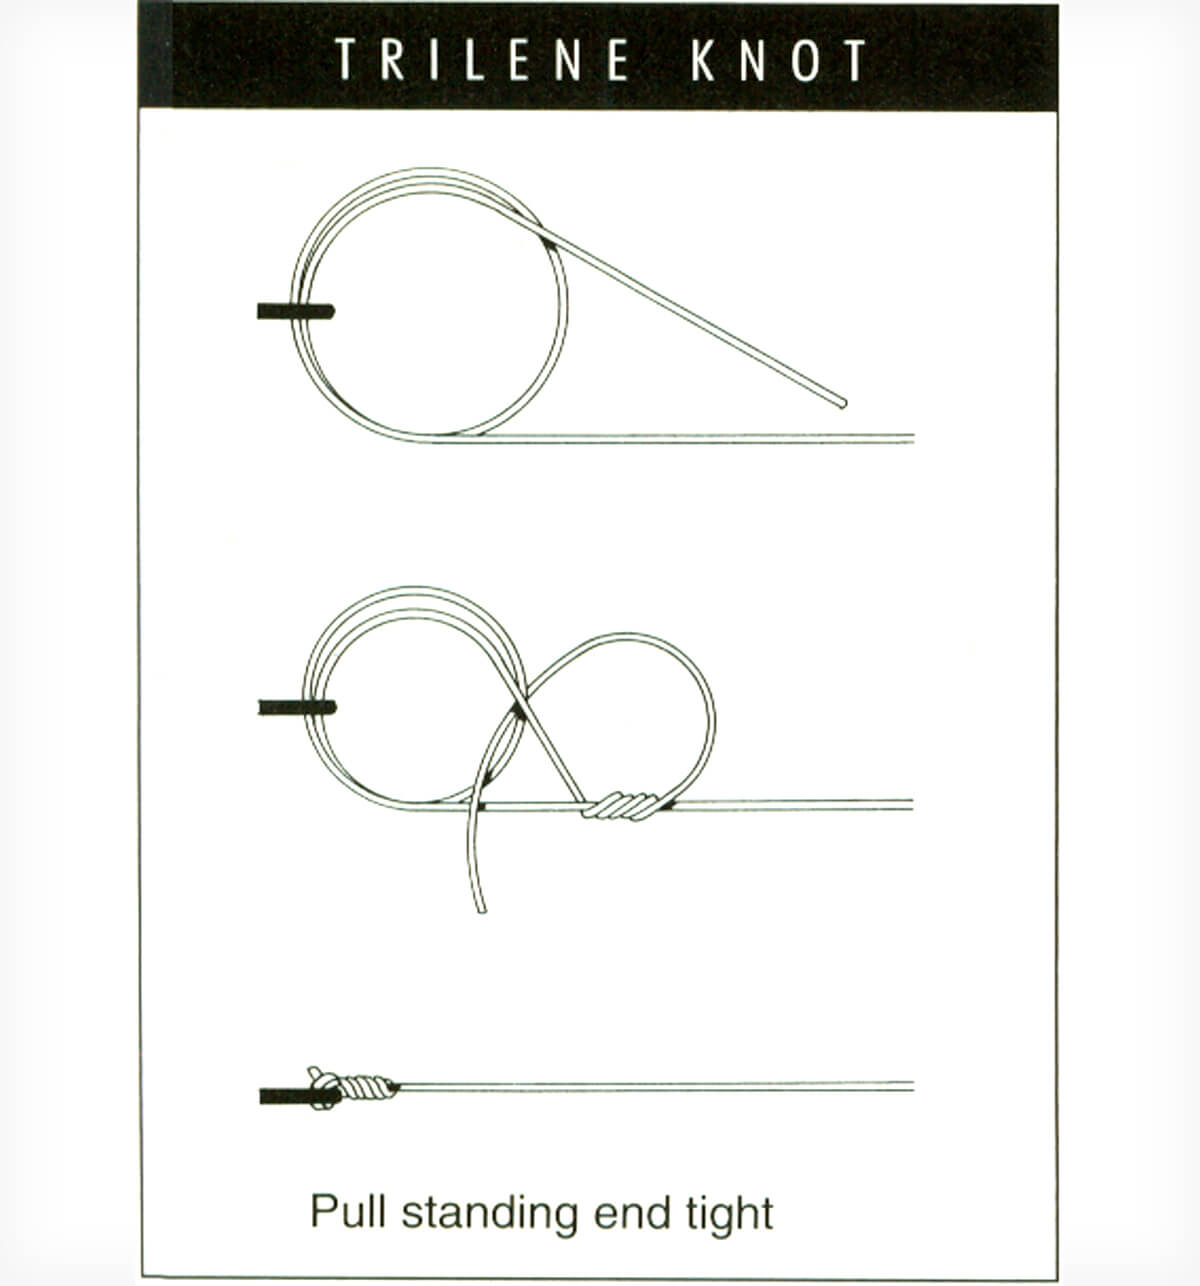 How to Tie a Tapered Leader Using the Perfection Loop, Blood, Slim Beauty,  and Lefty's Loop Knots 